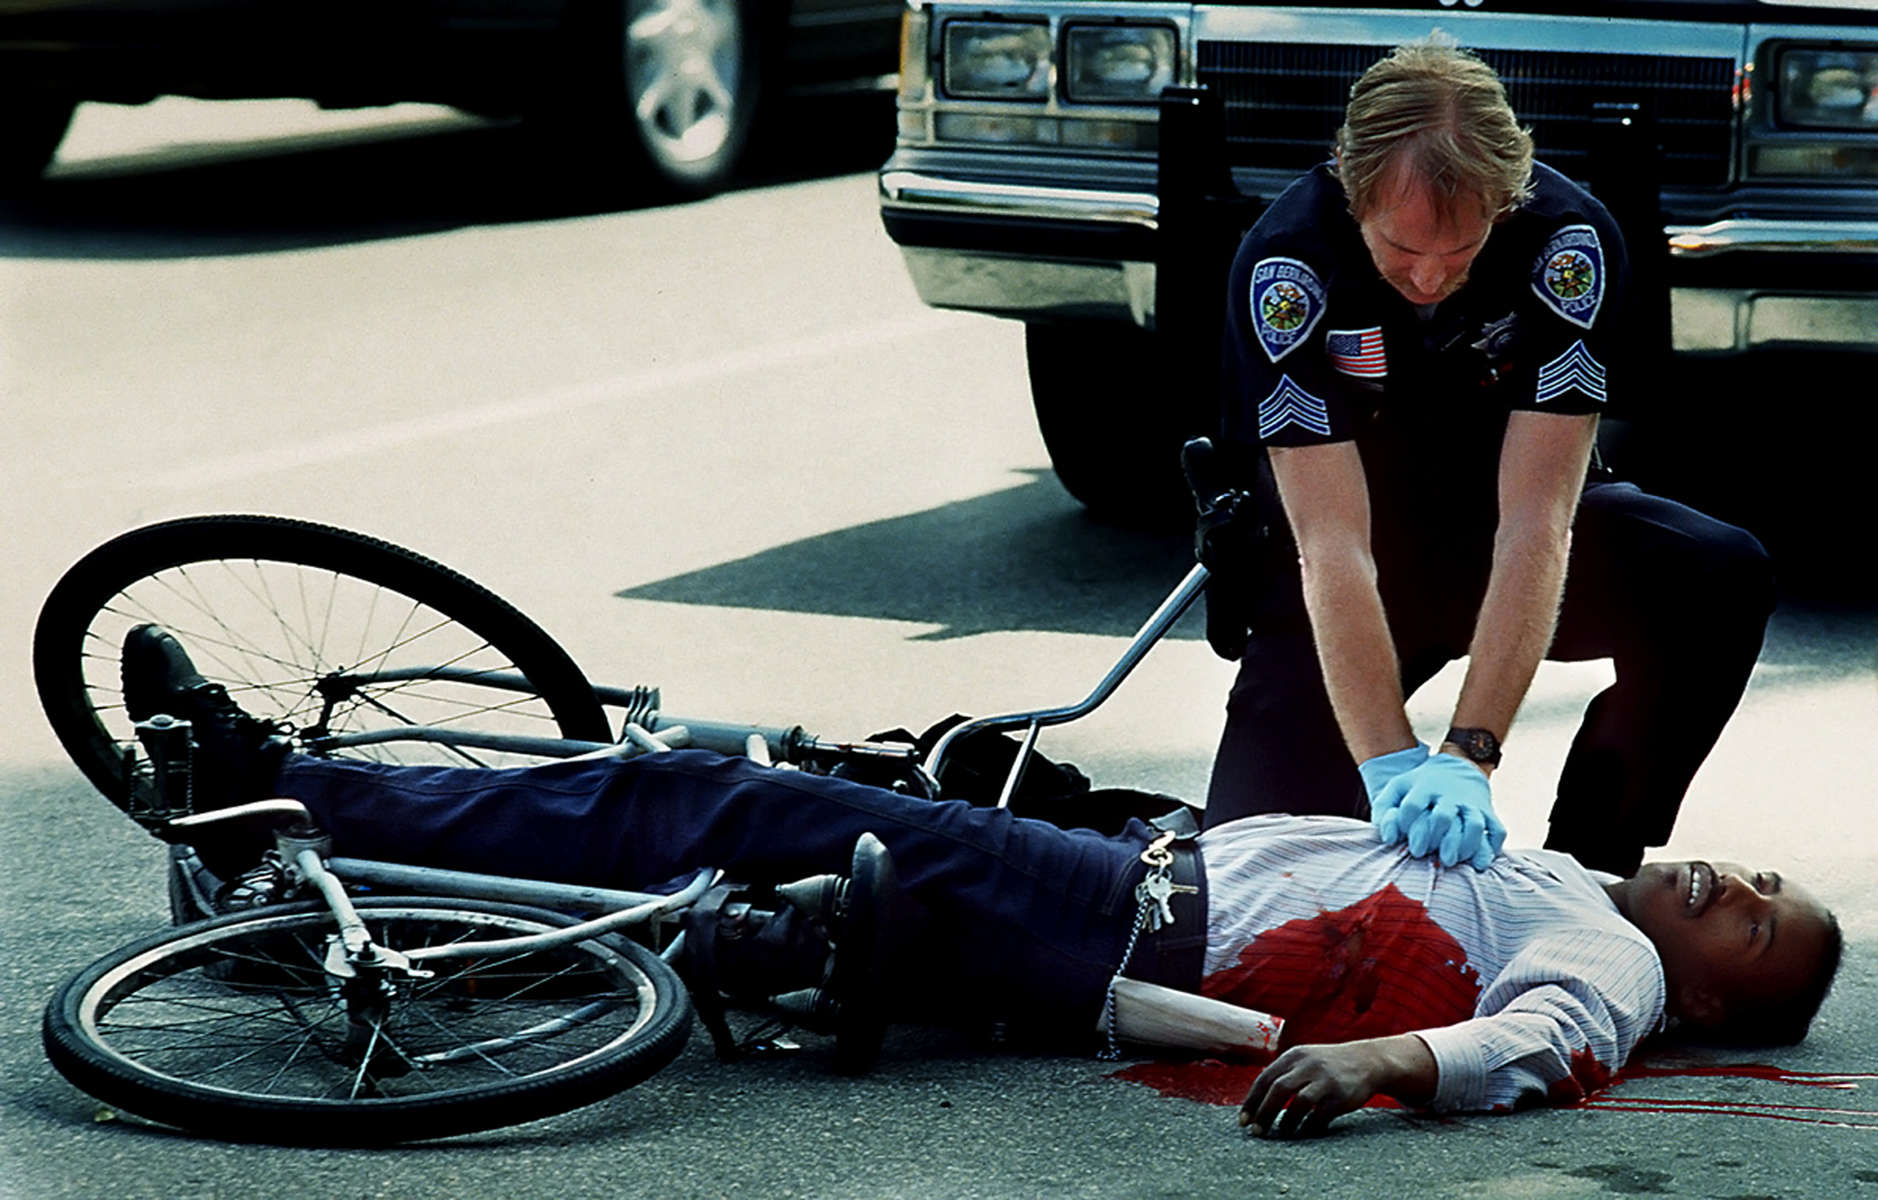 A San Bernardino police officer Mike Wilson attempts to revive a shooting victim near Waterman Avenuein San Bernardino, Calif. The city was ranked No. 1 in the nation for homicides in the early 1990s. (The San Bernardino Sun/ Mark Zaleski)